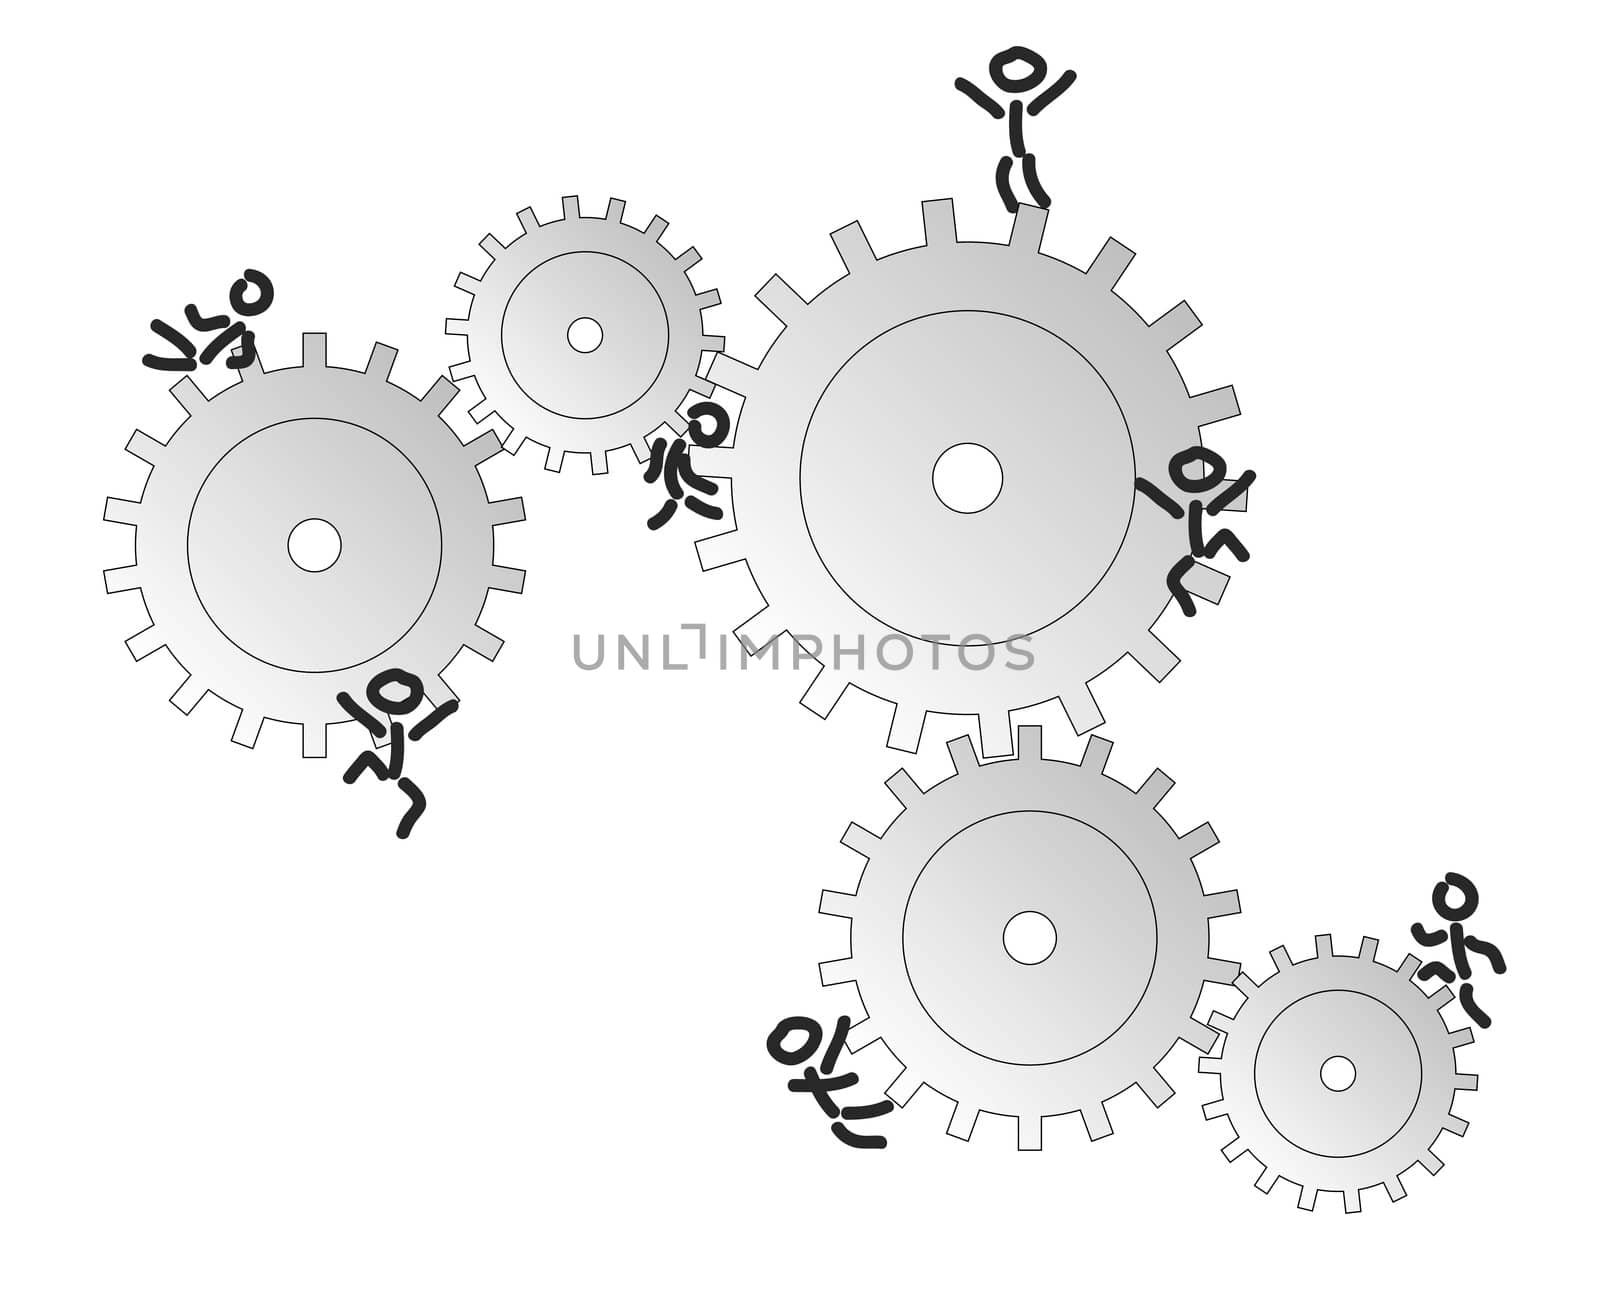 Several matchstick men climbin on cogwheels. All isolated on white background.